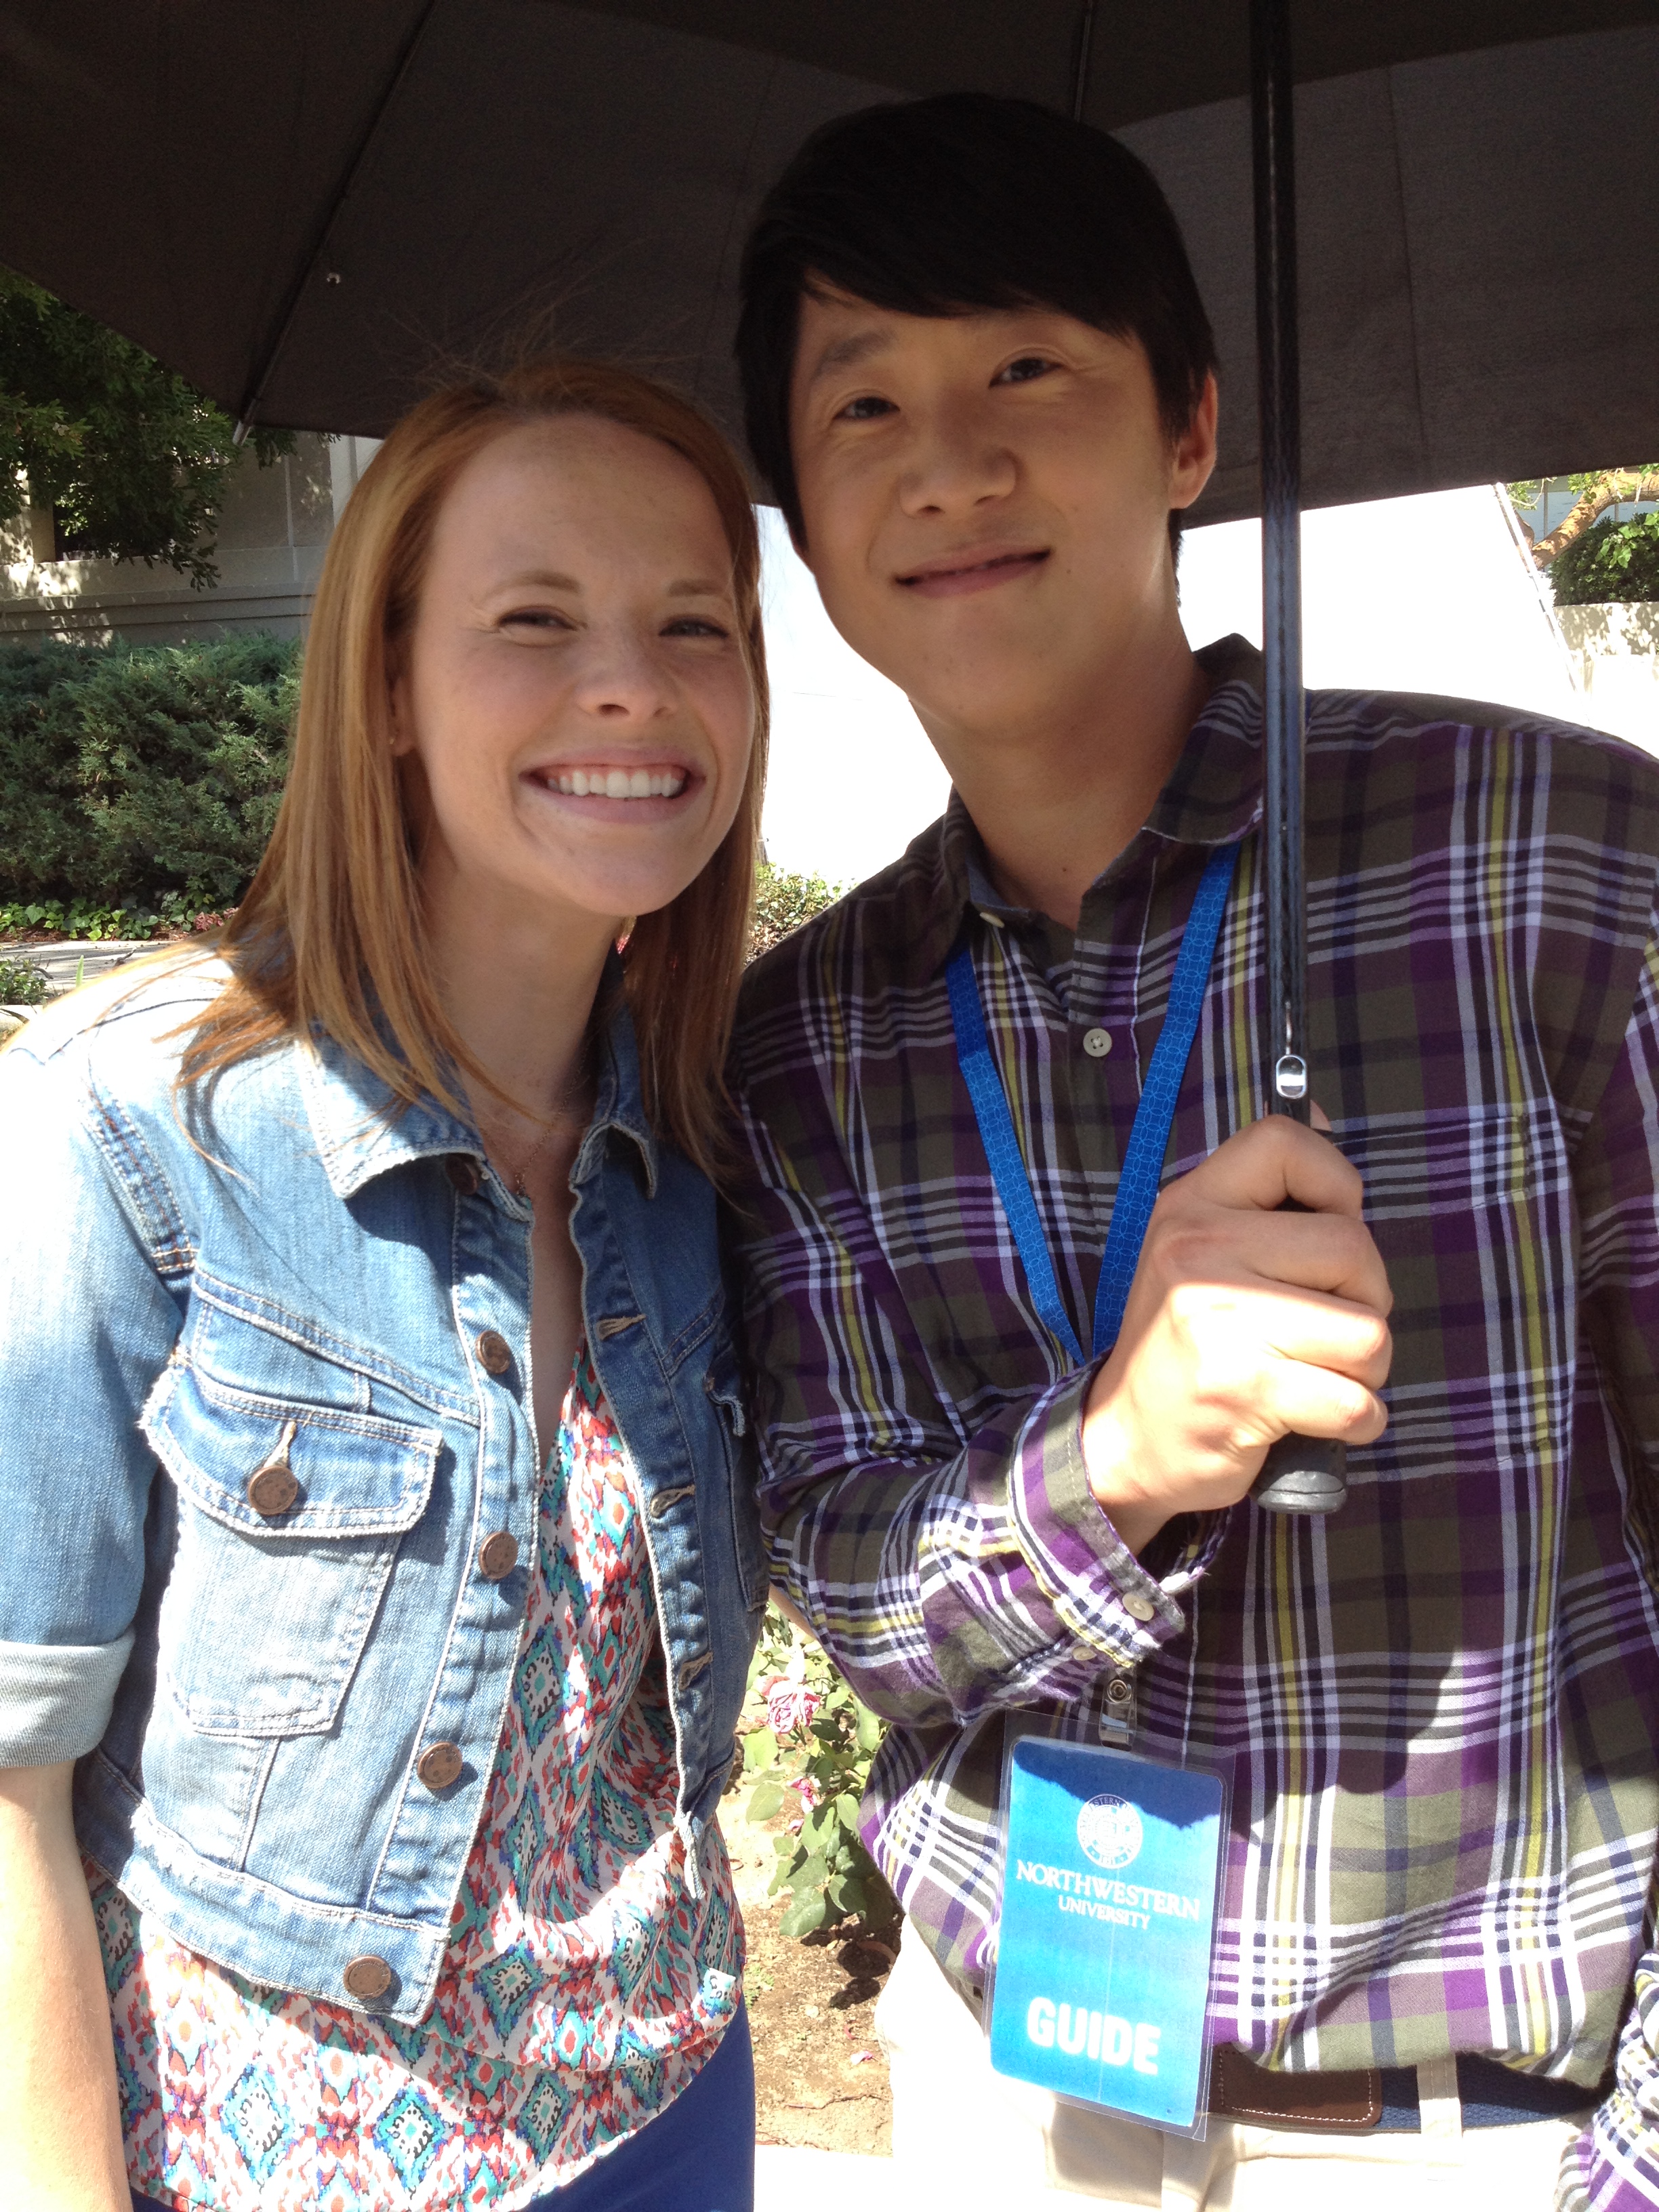 The fabulous Katie Leclerc and I on set for Switched at Birth!